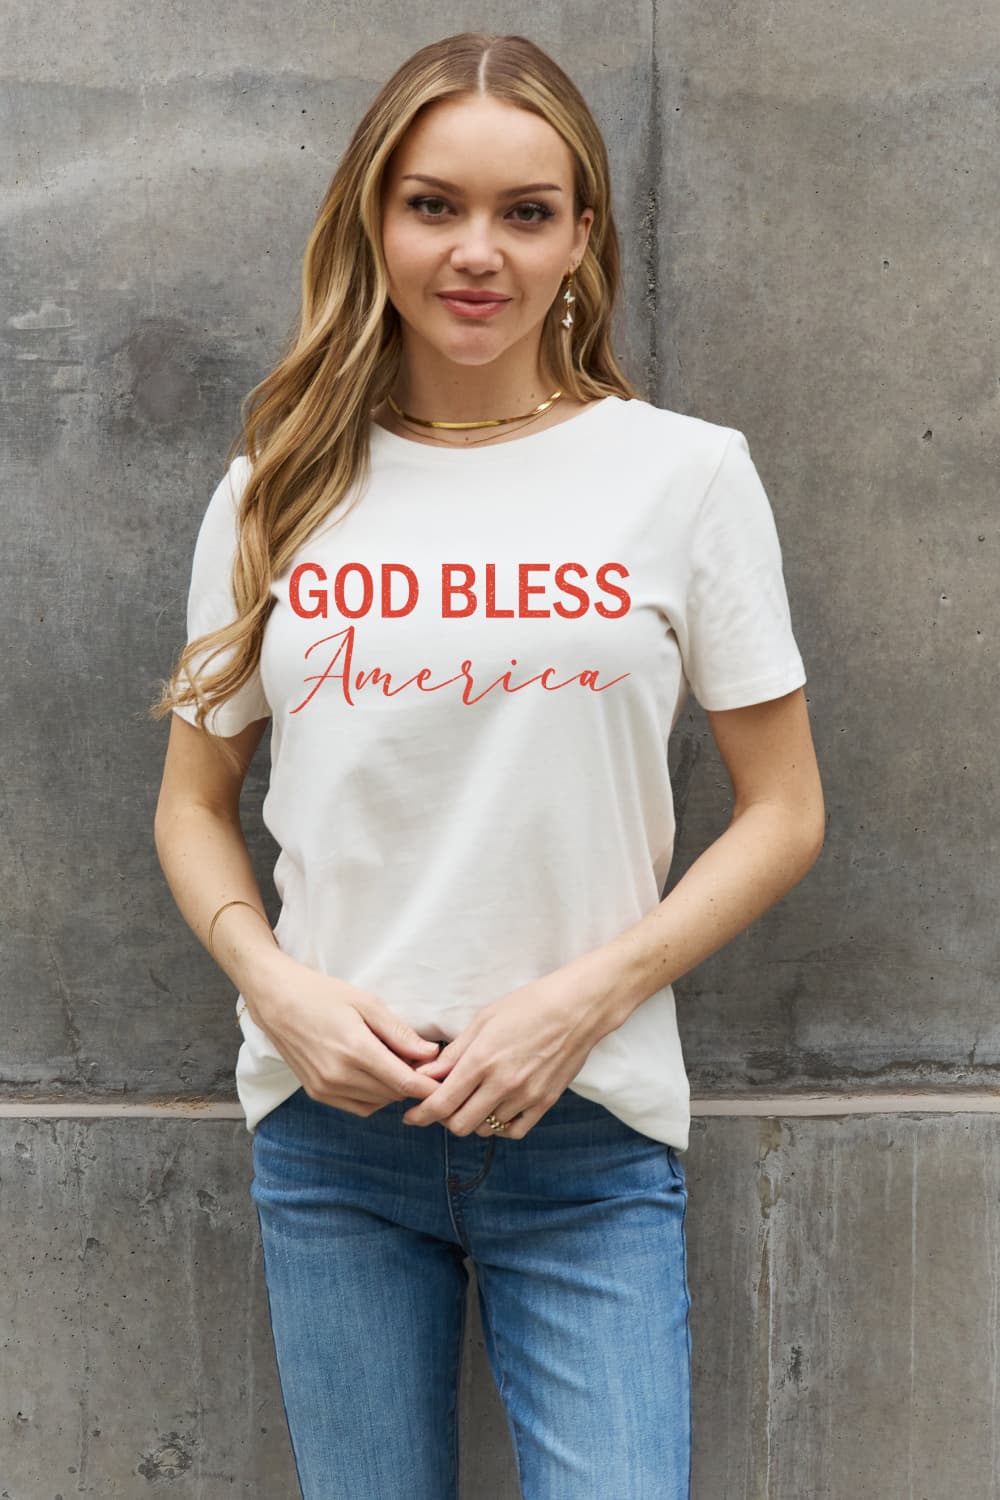 Simply Love GOD BLESS AMERICA Graphic Cotton Tee